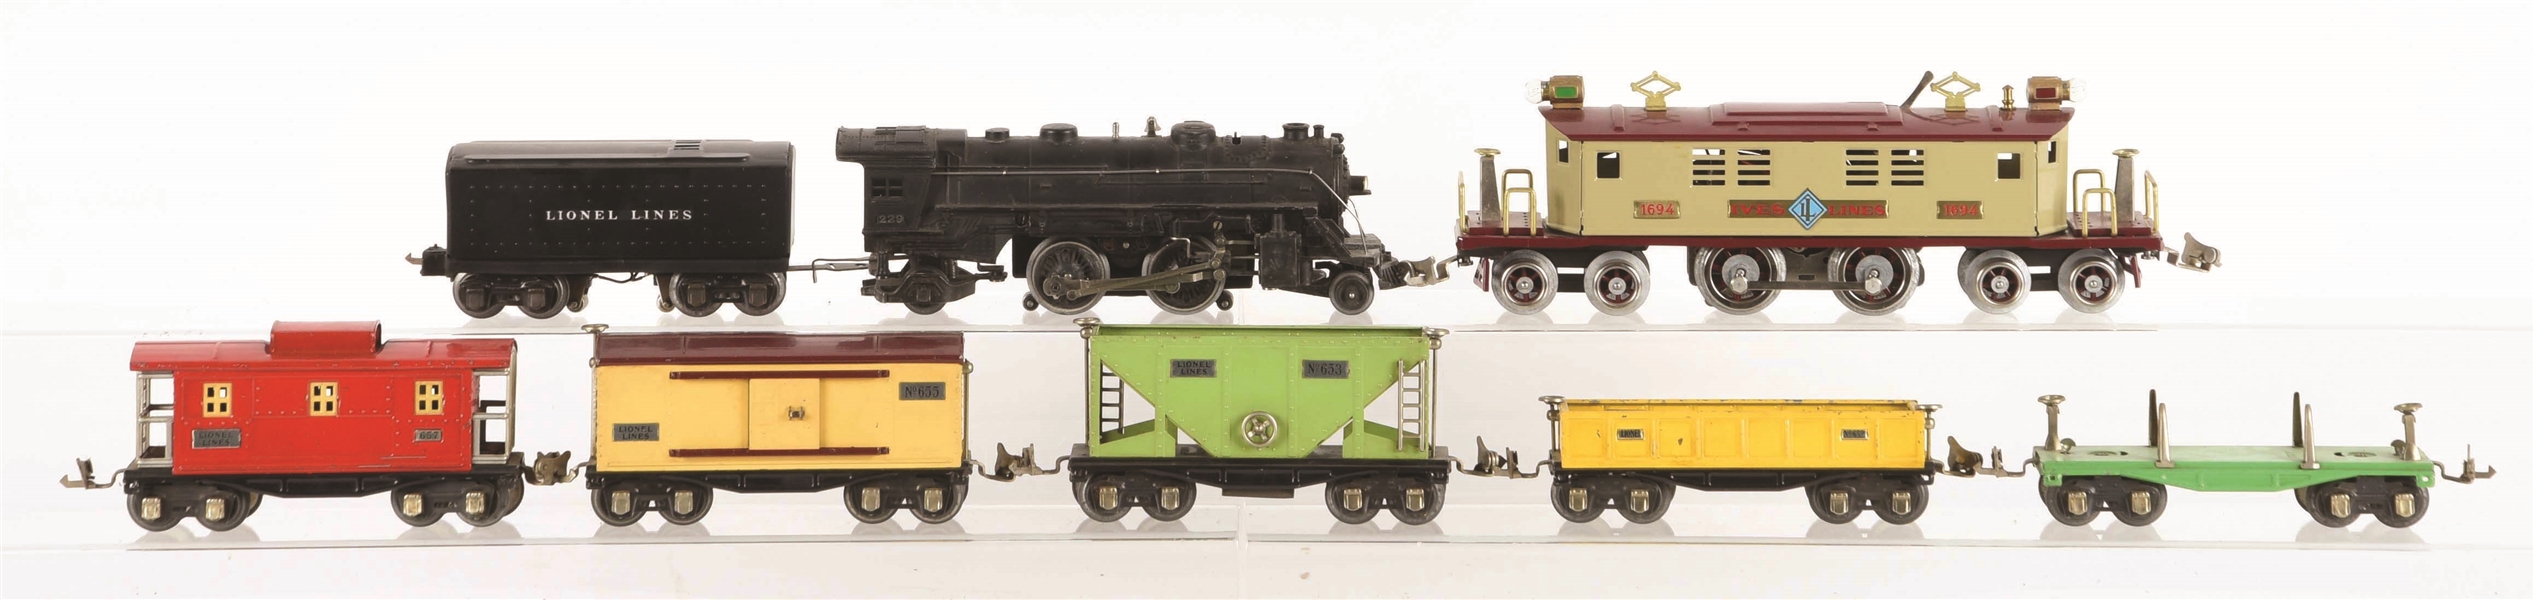 LOT OF 7: IVES REPRO NO. 1694 LOCOMOTIVE WITH ORIGINAL LIONEL NO. 229 & 600 SERIES FREIGHTS. 